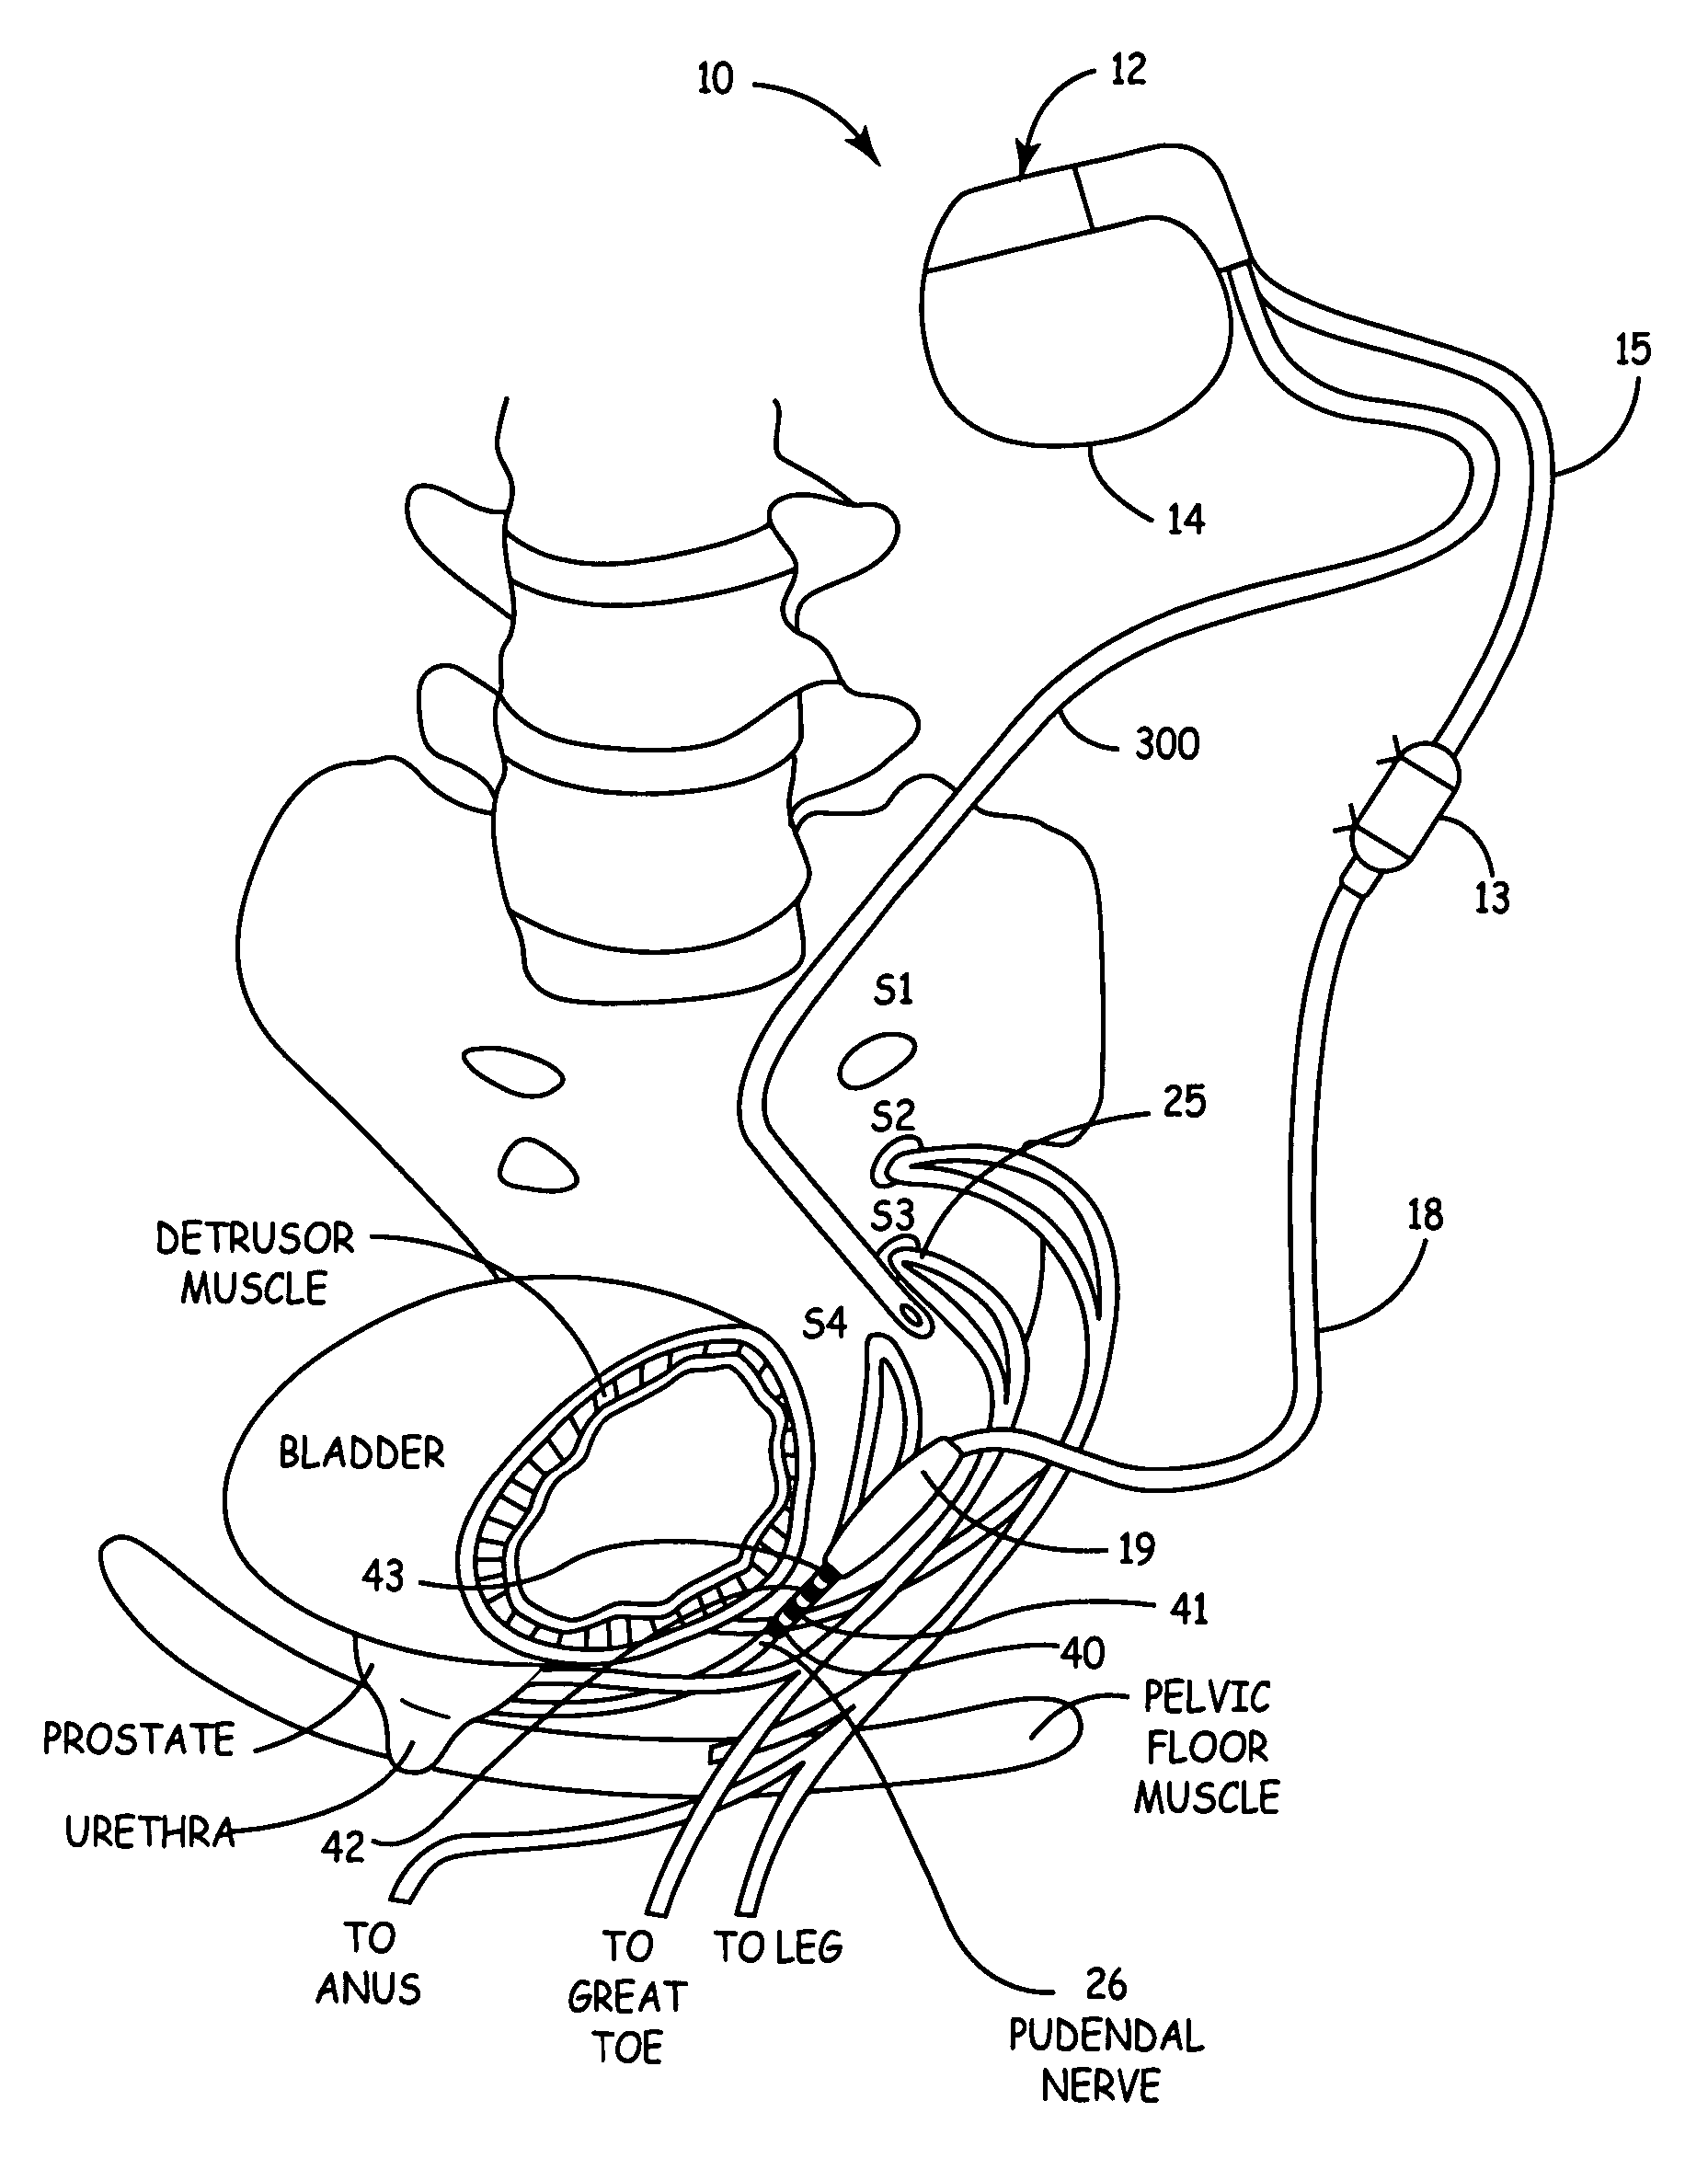 Method, system and device for treating disorders of the pelvic floor by delivering drugs to various nerves or tissues